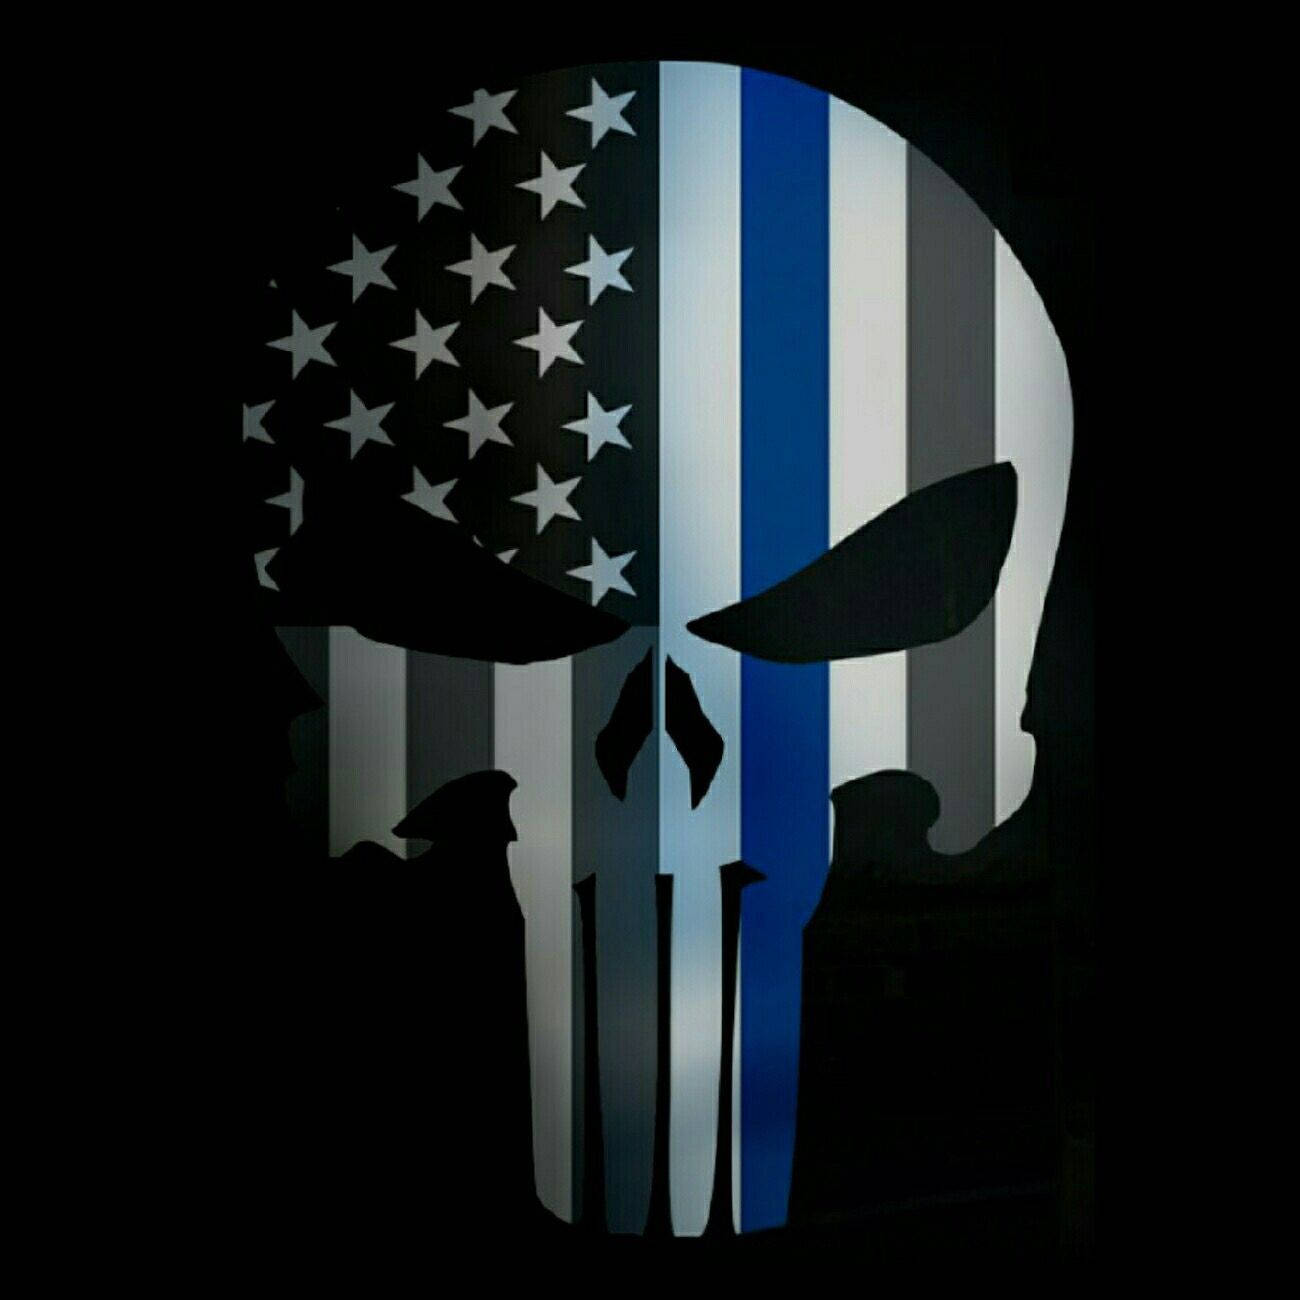 Show Your Support For The Thin Blue Line With This Punisher Inspired Skull Emblem Background